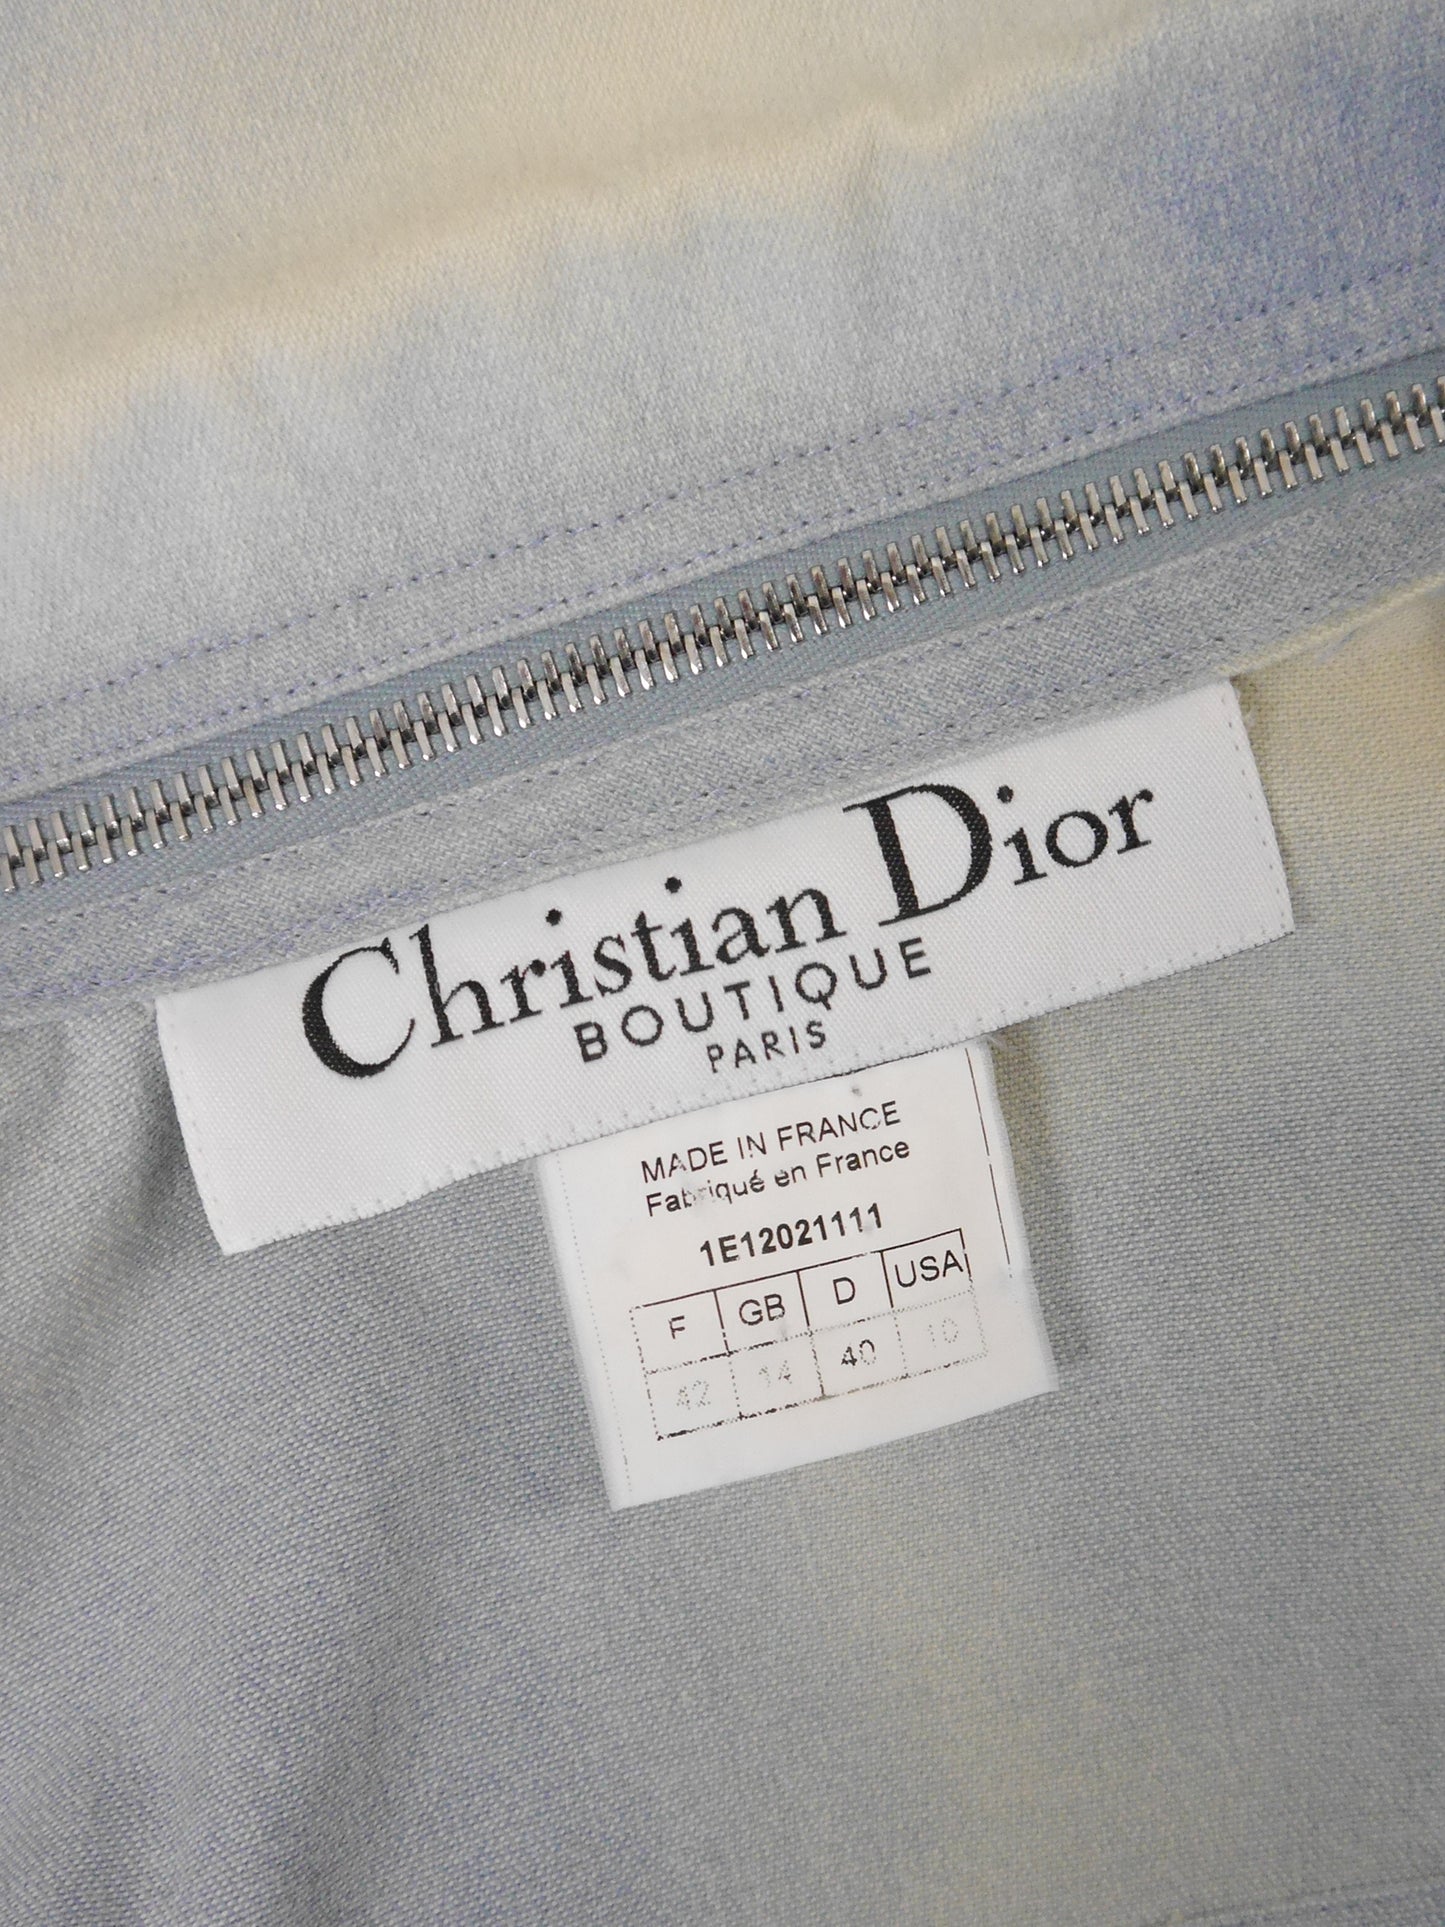 CHRISTIAN DIOR by John Galliano Spring 2001 Vintage Convertible Denim Jacket w/ Logo Zippers Size M